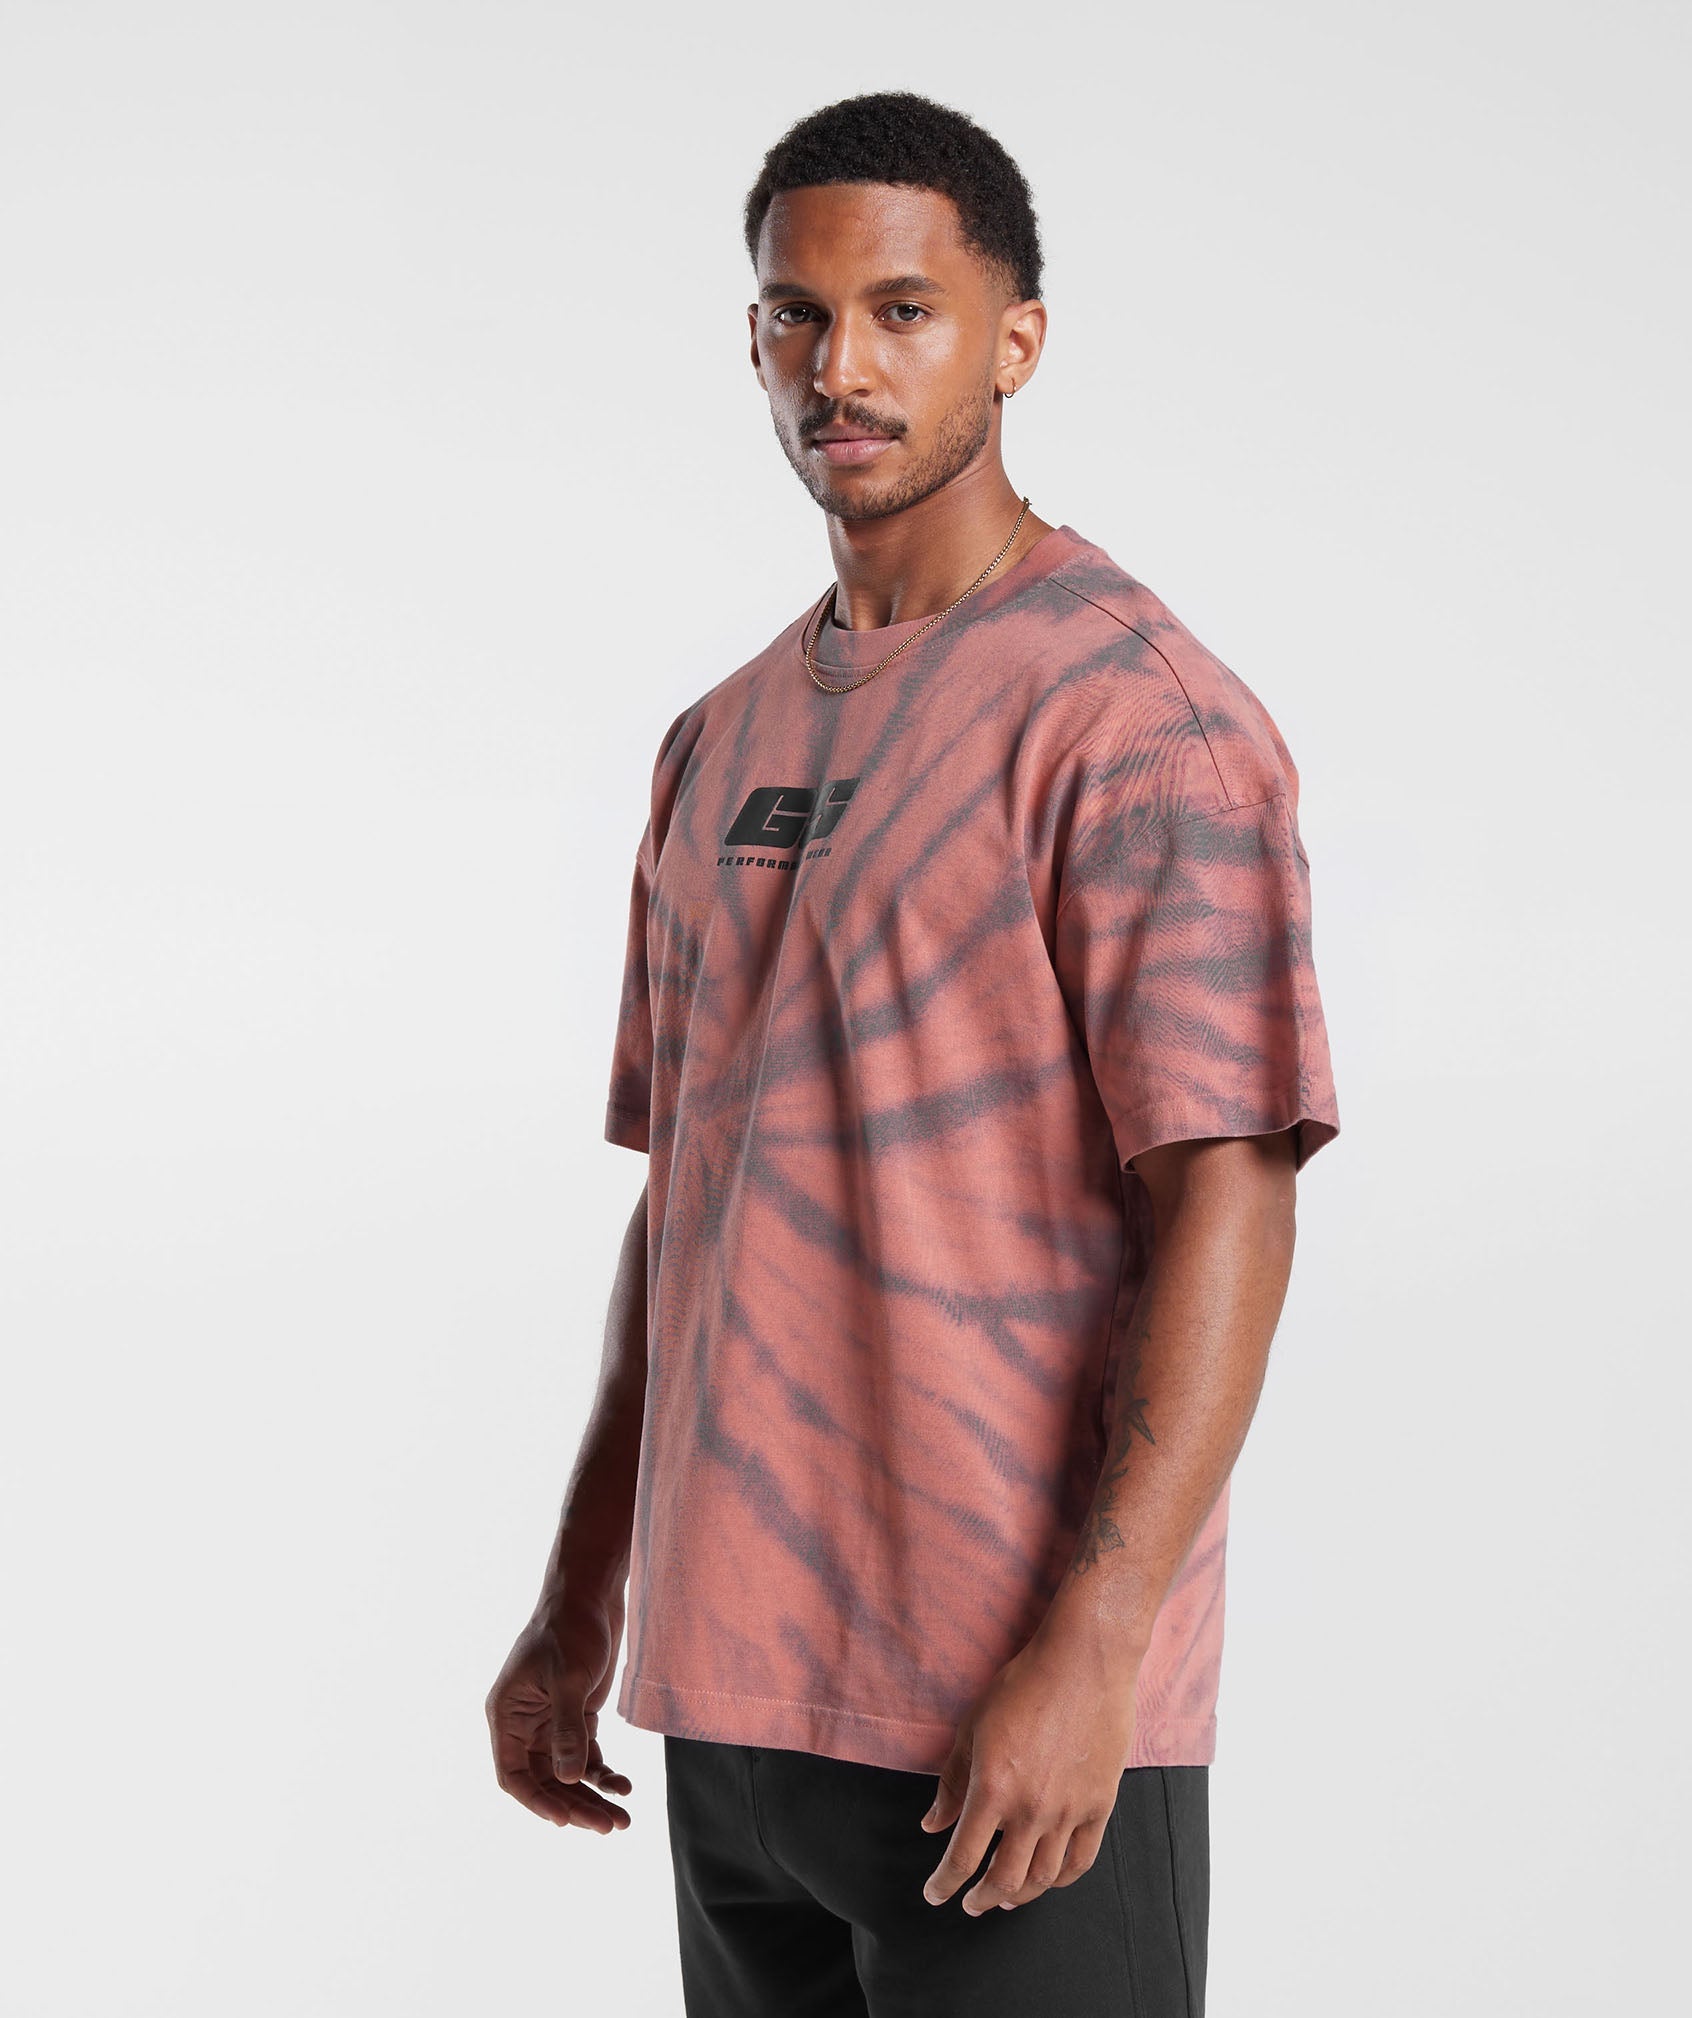 Rest Day T-Shirt in Terracotta Pink/Dusty Maroon/Spiral Optic Wash - view 3